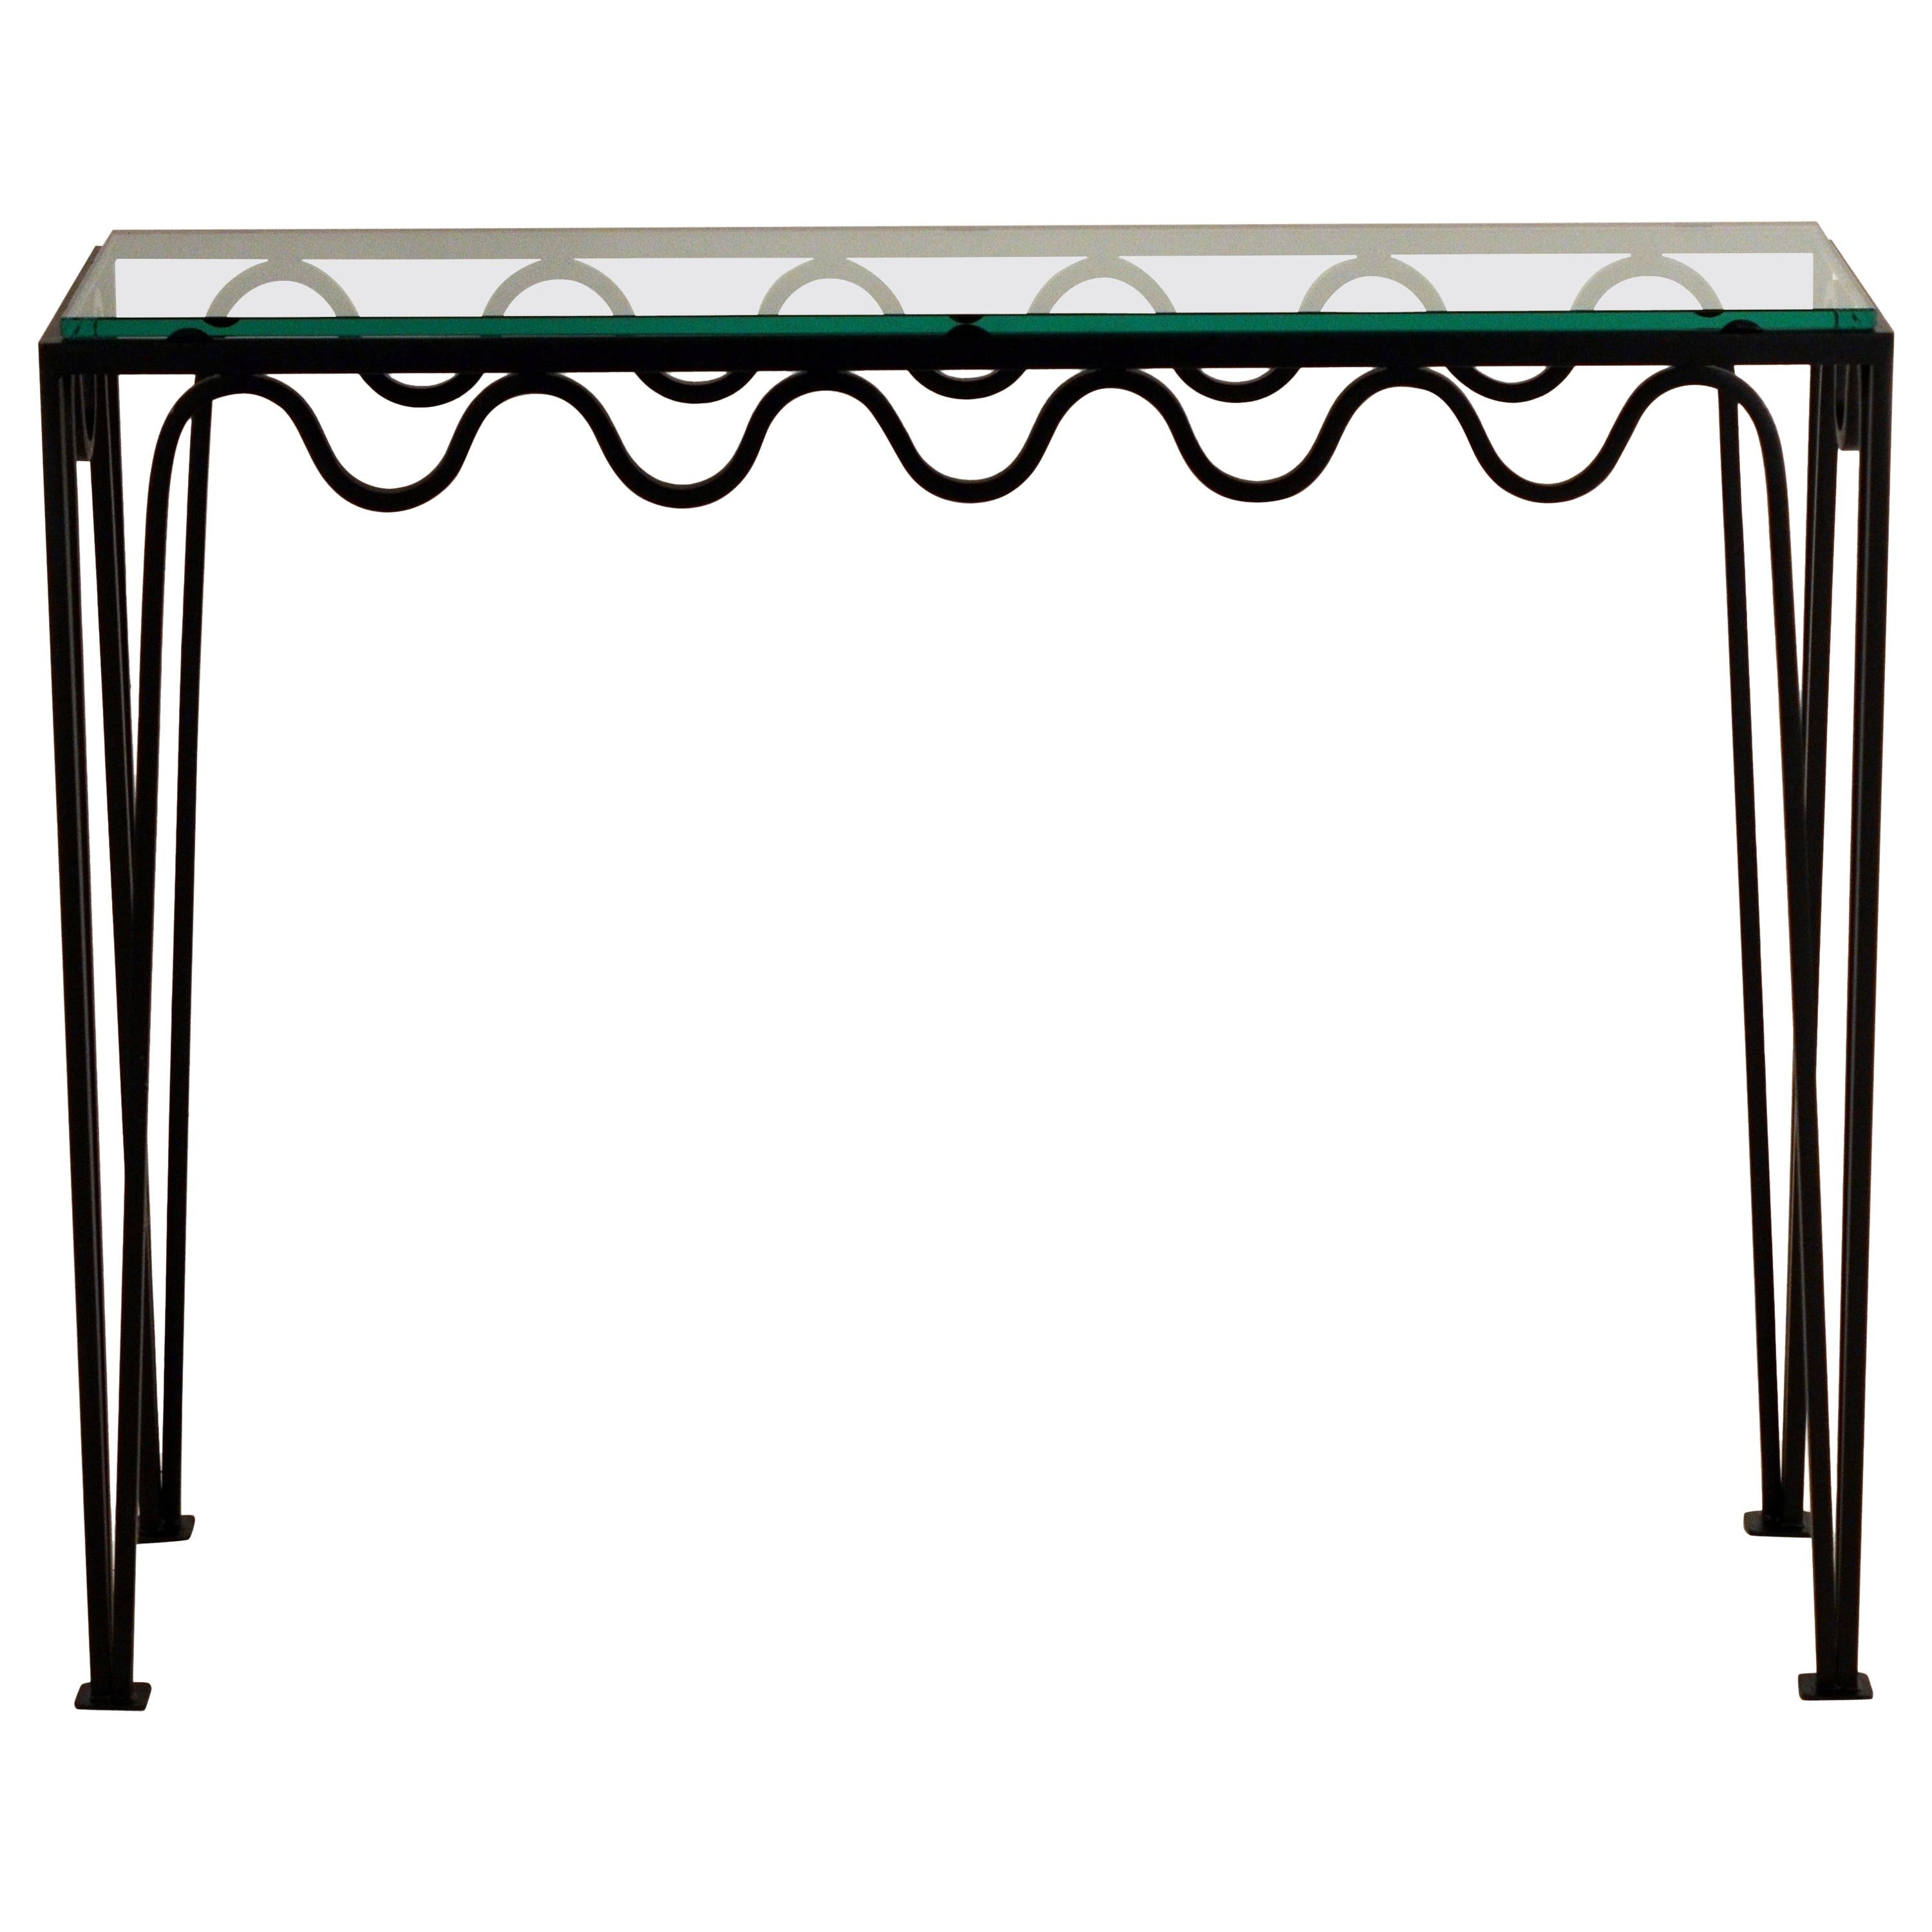 Undulating 'Méandre' Wrought Iron and Glass Console by Design Frères